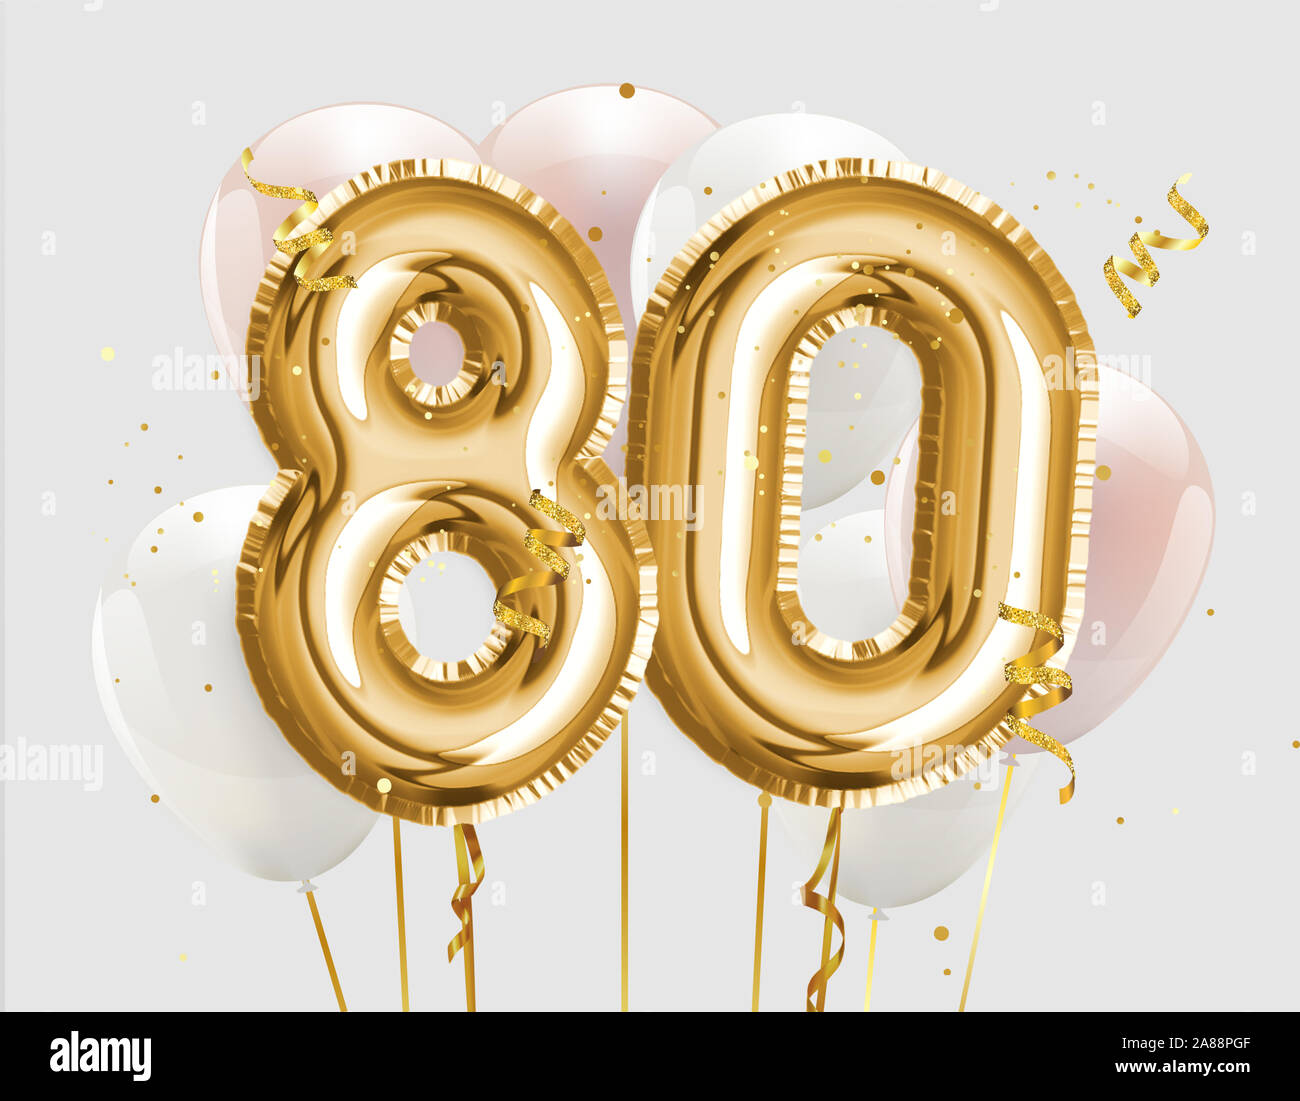 16" 80 Rose Gold Number Balloons 80th Birthday Party Anniversary Foil Balloon US